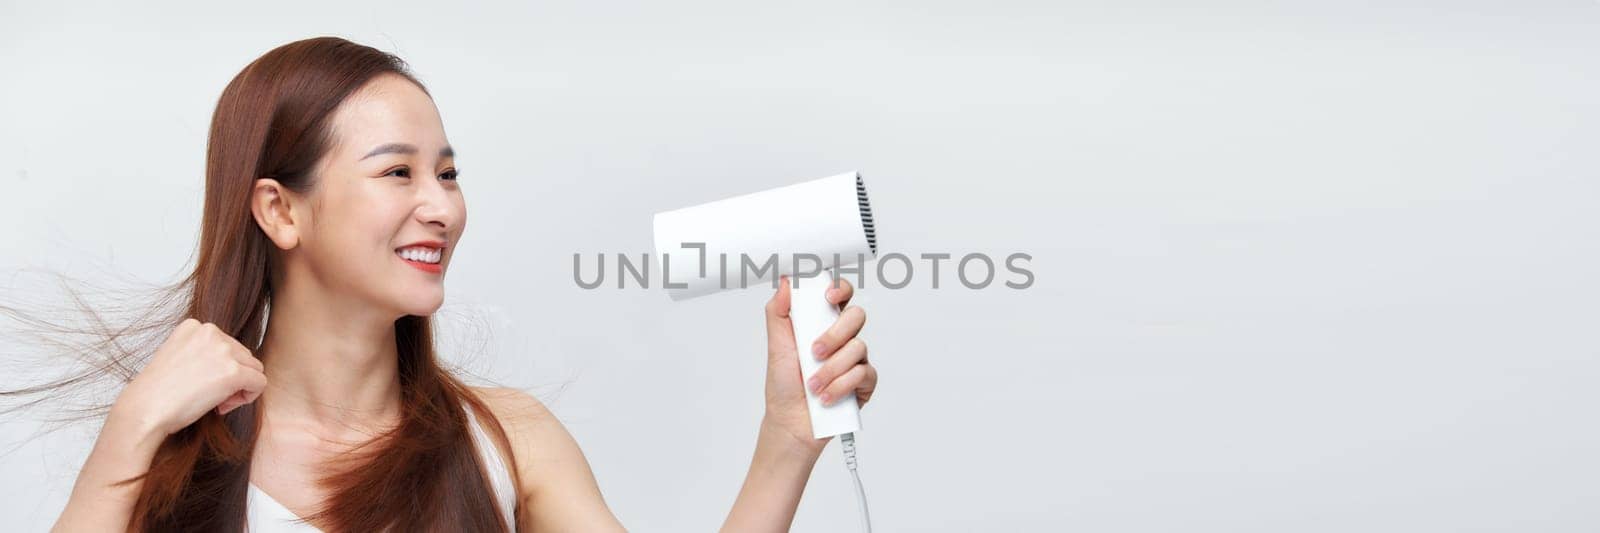 Woman dries her beautiful long hair with a hair dryer against a white background. Web banner